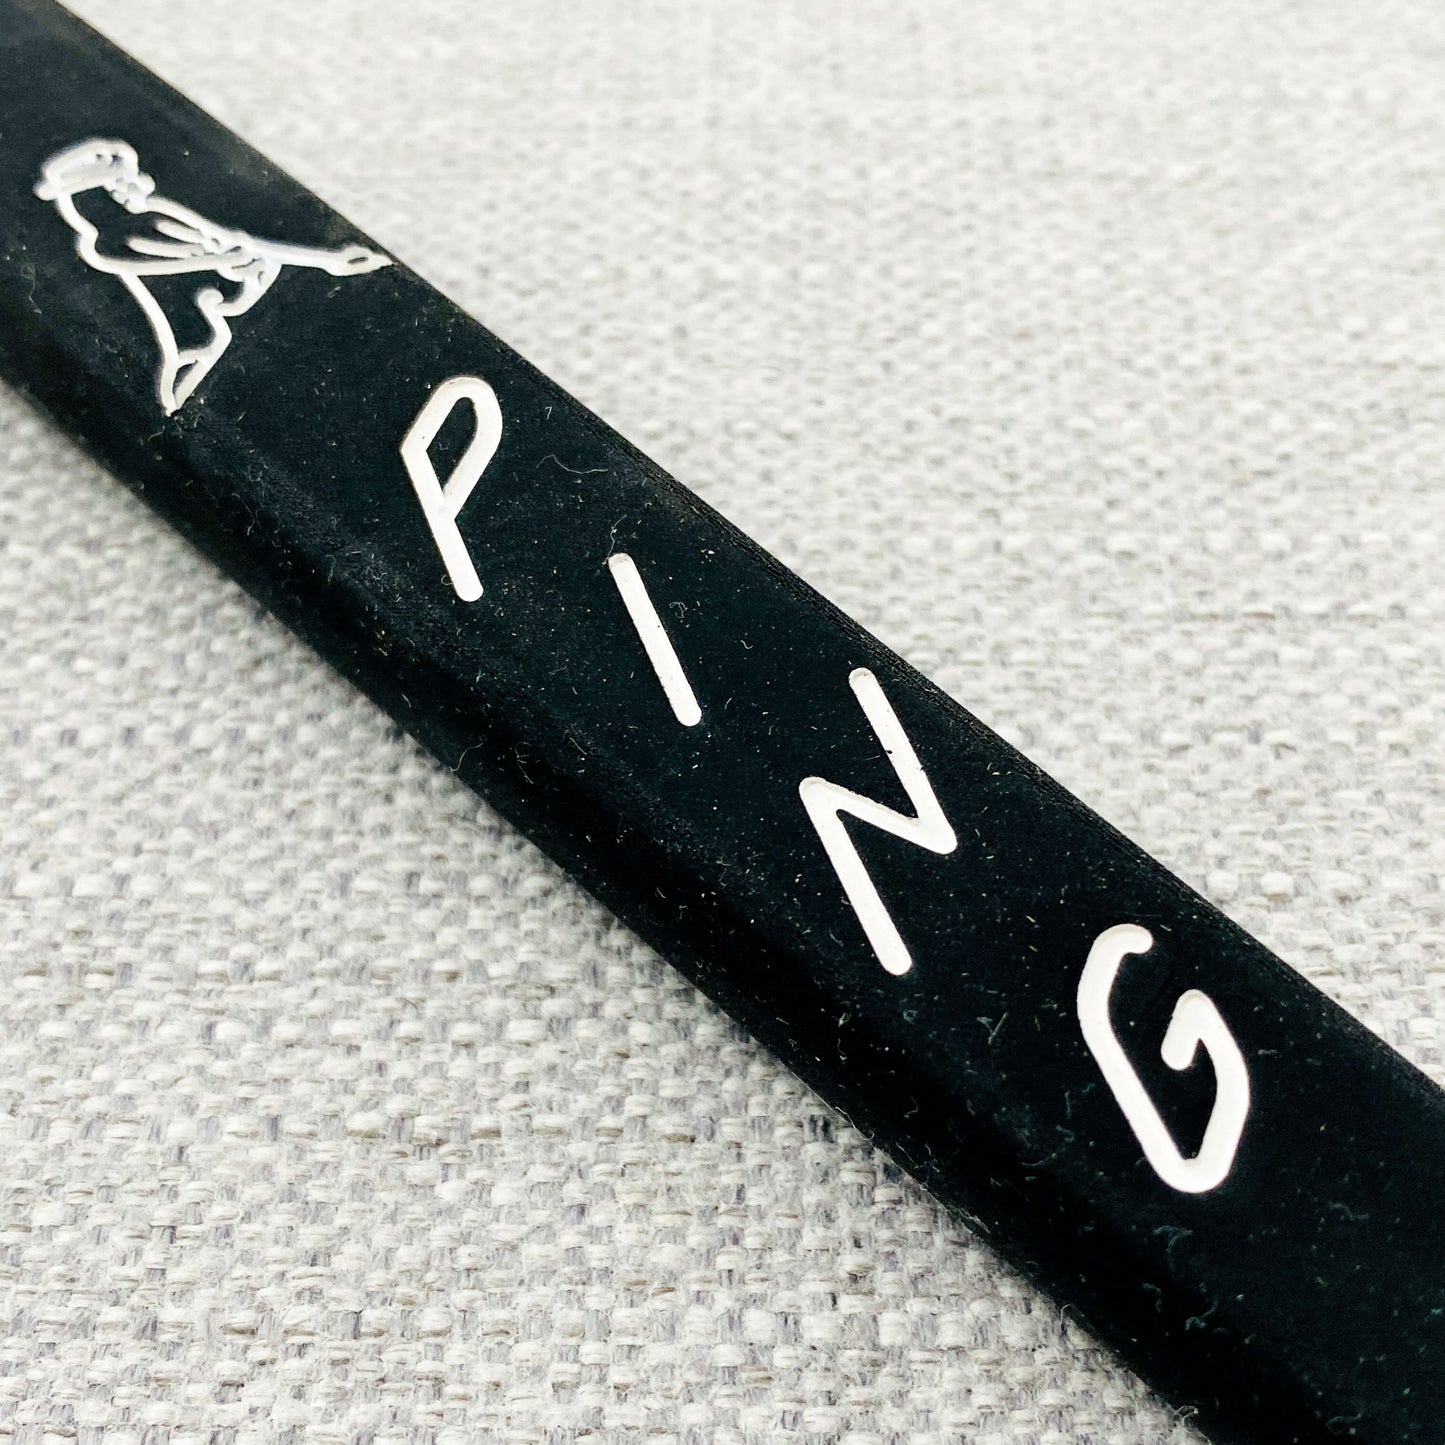 Golf Pride PING PP58 pistol putter grip. Black - Price includes fitment.